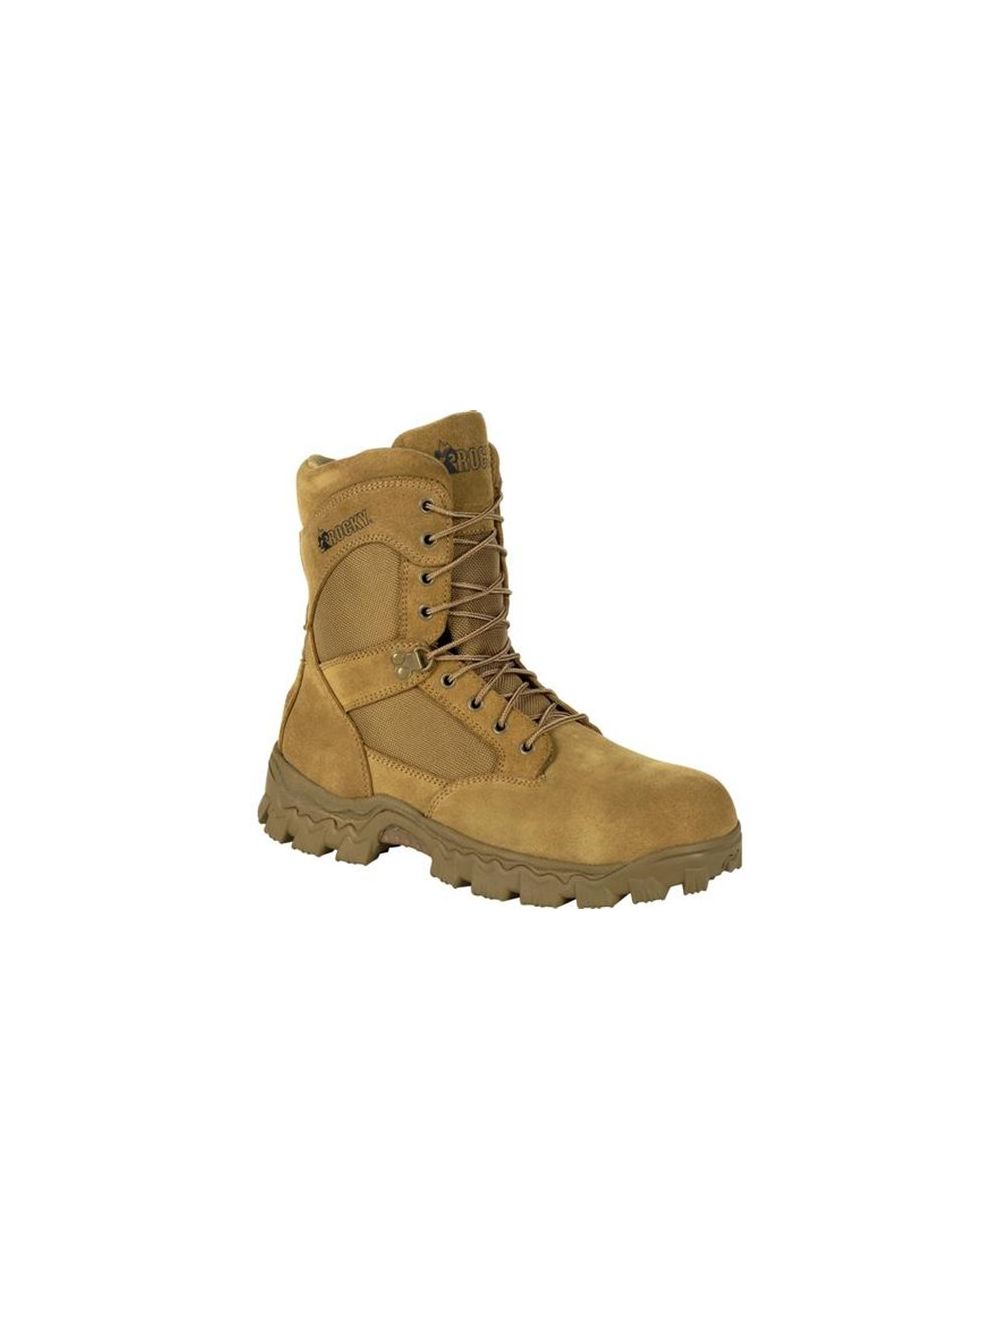 Alpha Force Composite Toe Duty Boot